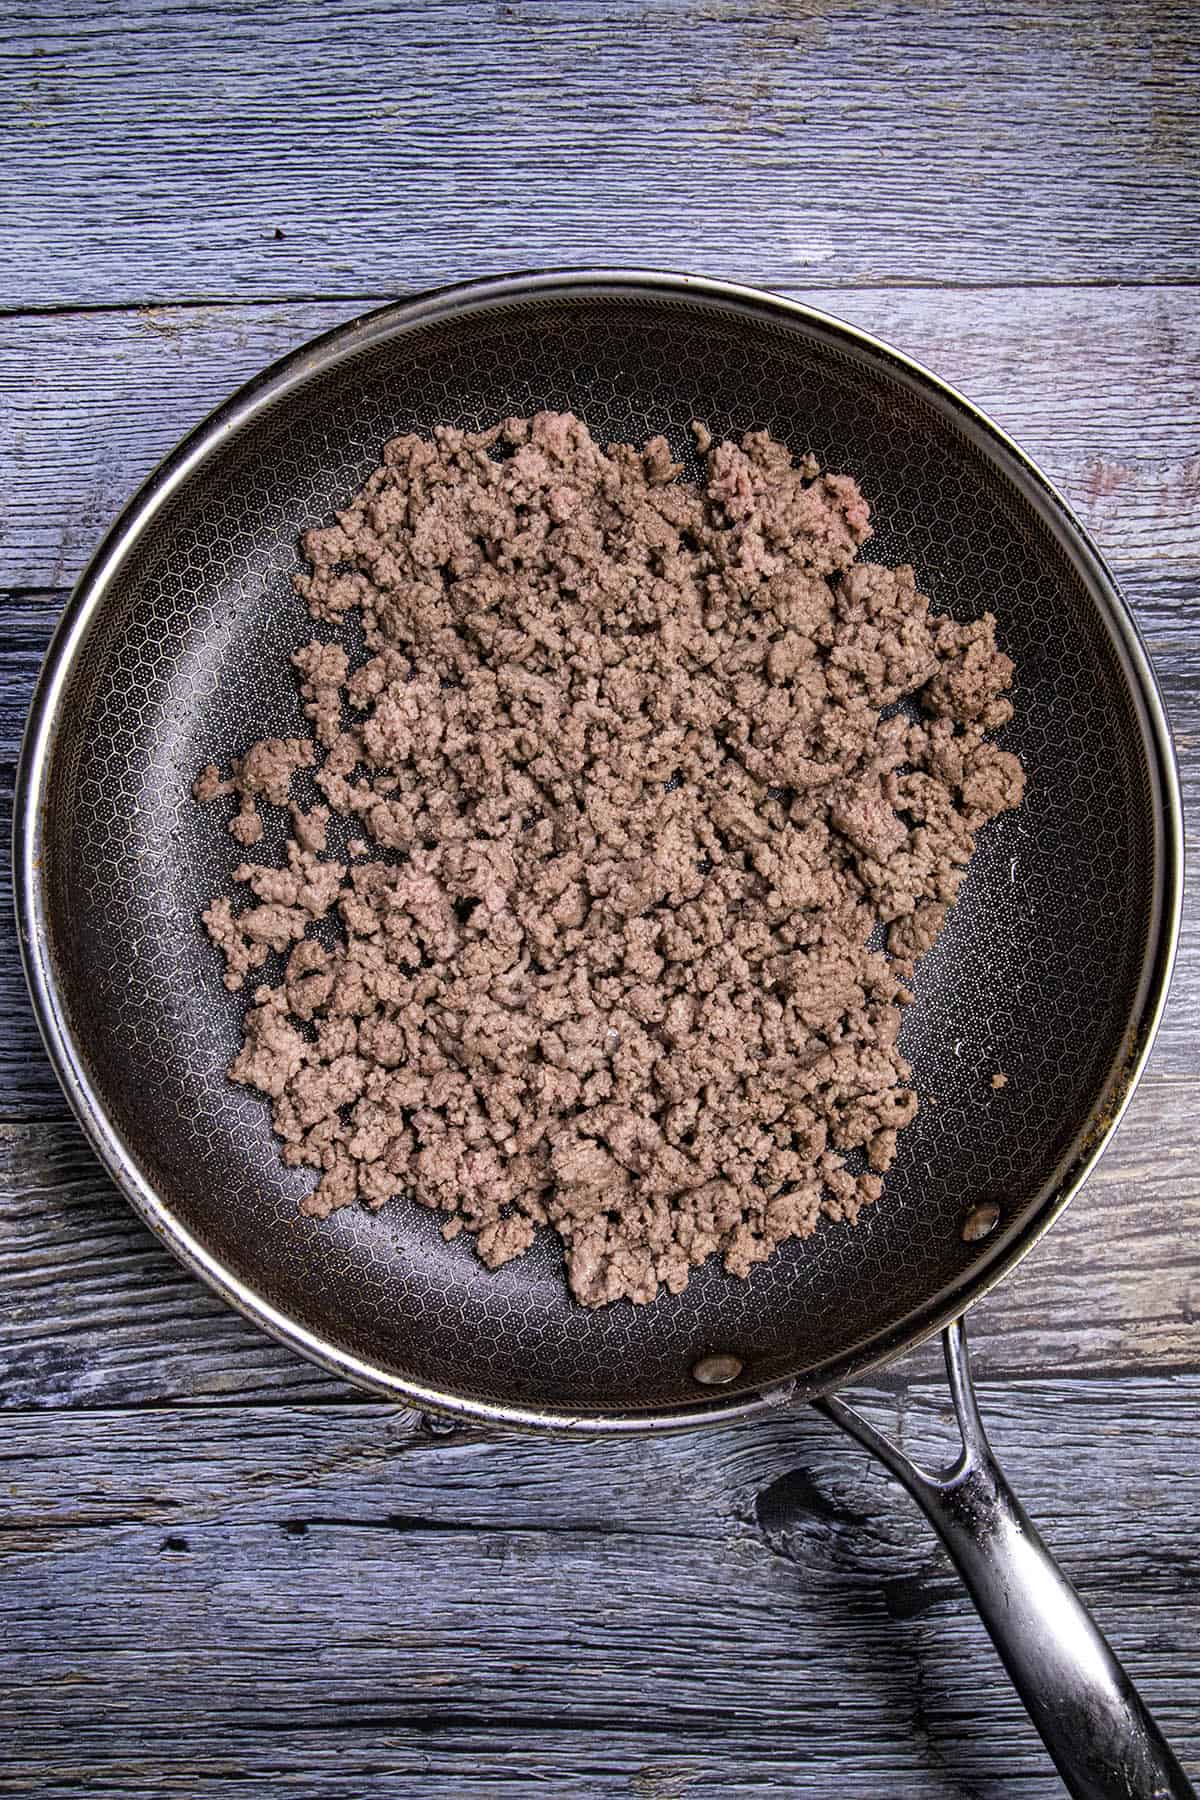 Cooking ground beef in a pan for nachos